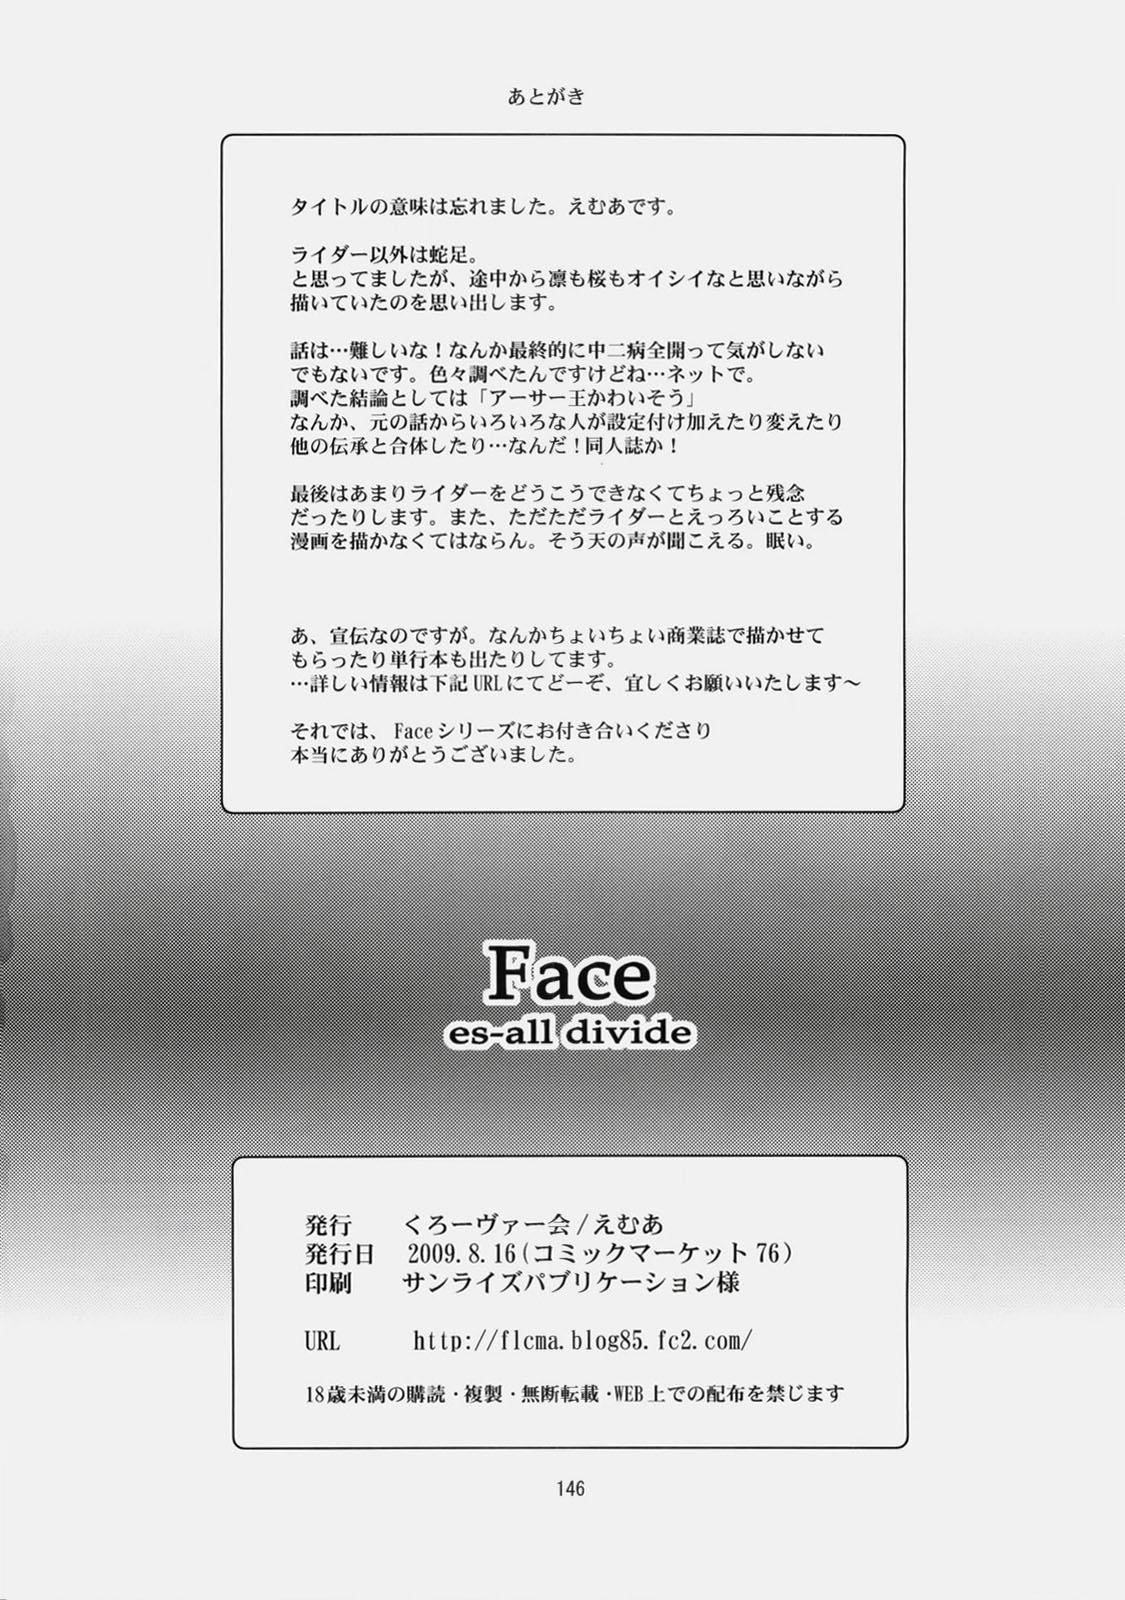 European Face es-all divide - Fate stay night Amateur Porn - Page 143